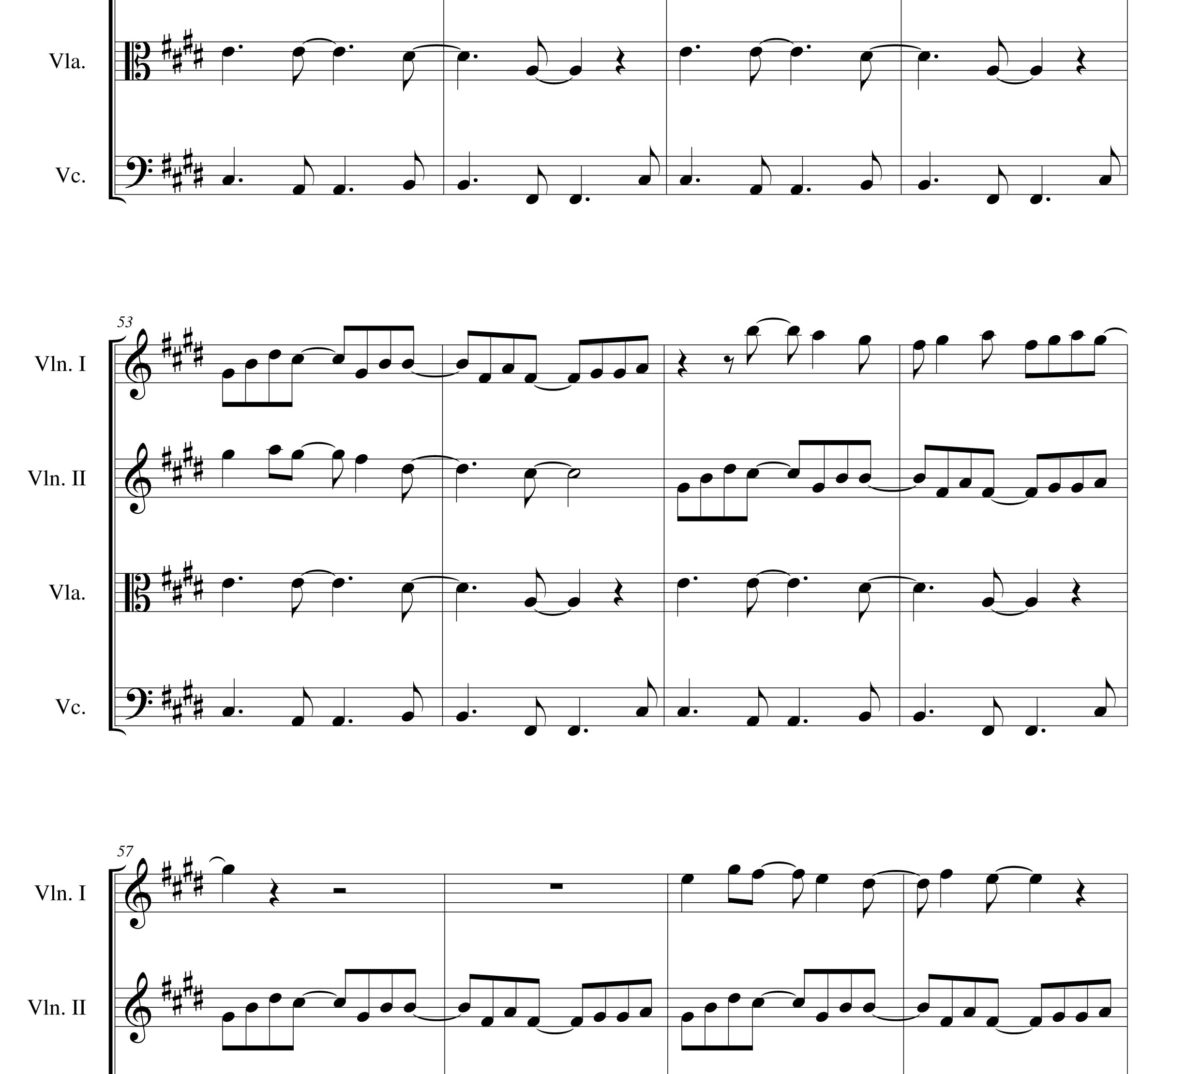 Message in a bottle Sheet music - The Police - for String Quartet